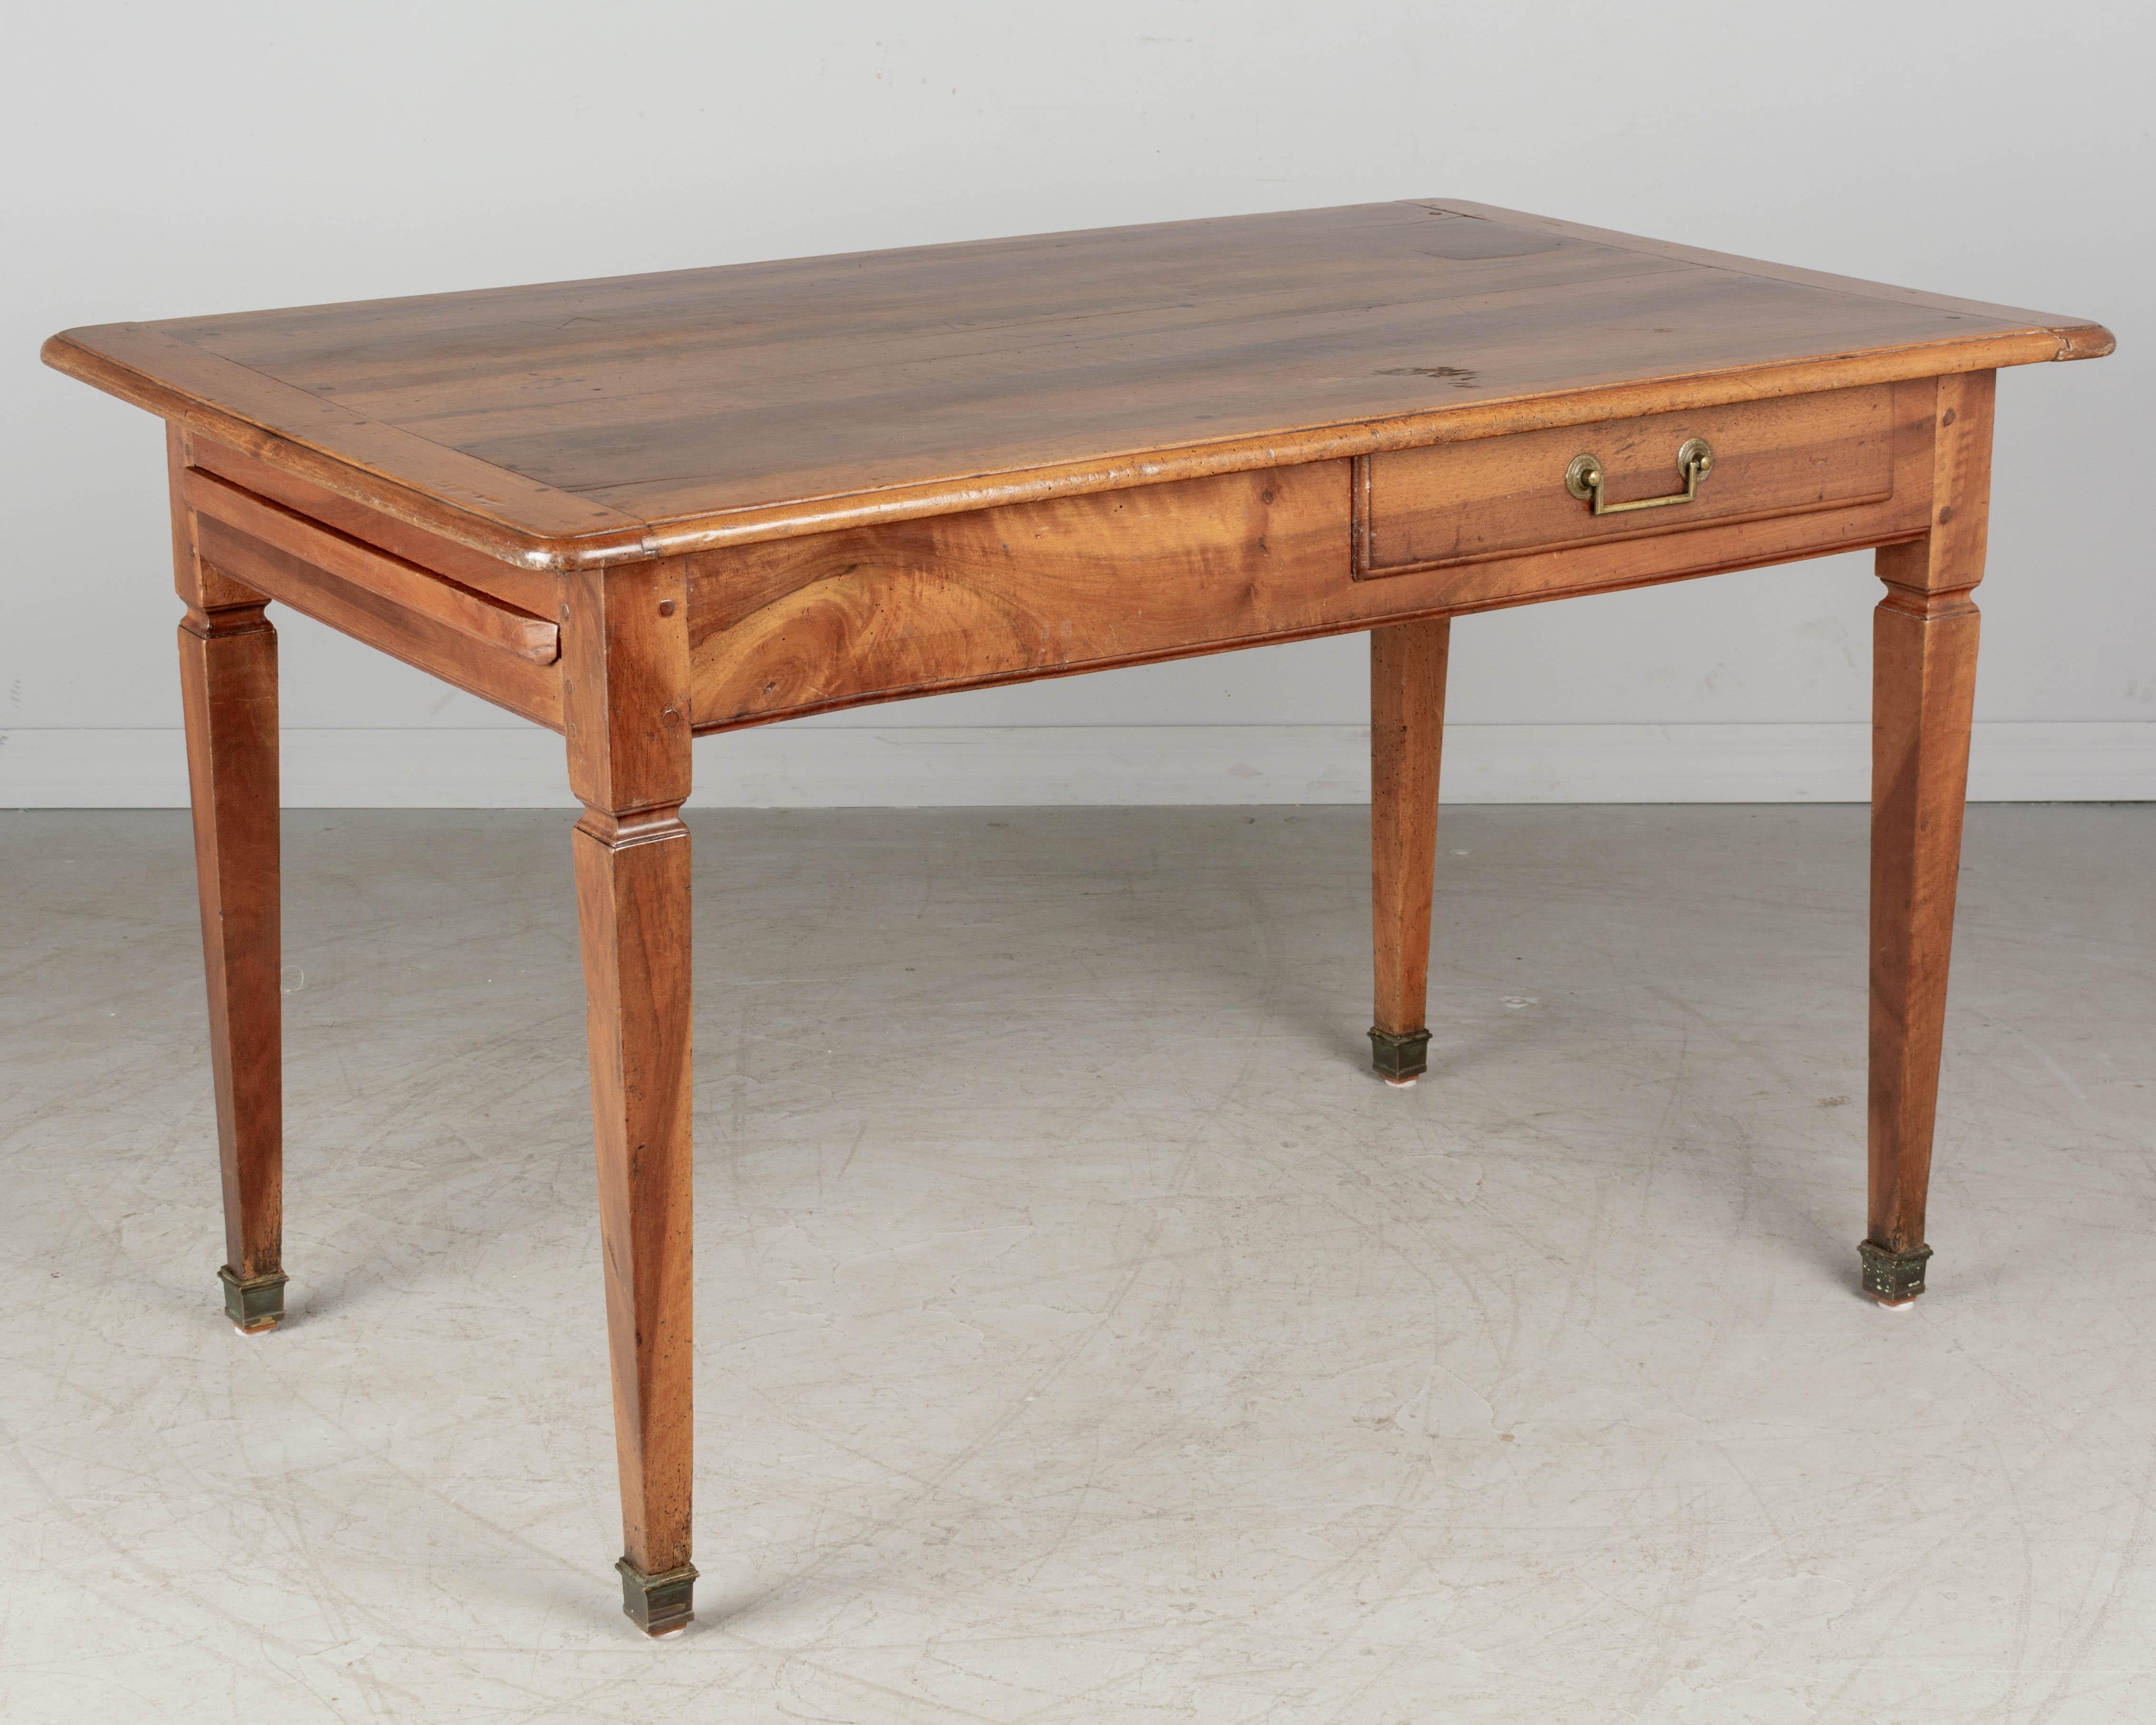 An early 19th century Louis XVI style Country French farm table made of solid walnut. Top is made from three planks with nice wood grain and rounded corners. Dovetailed drawer for silverware with divided interior and brass pull. Pull-out cutting